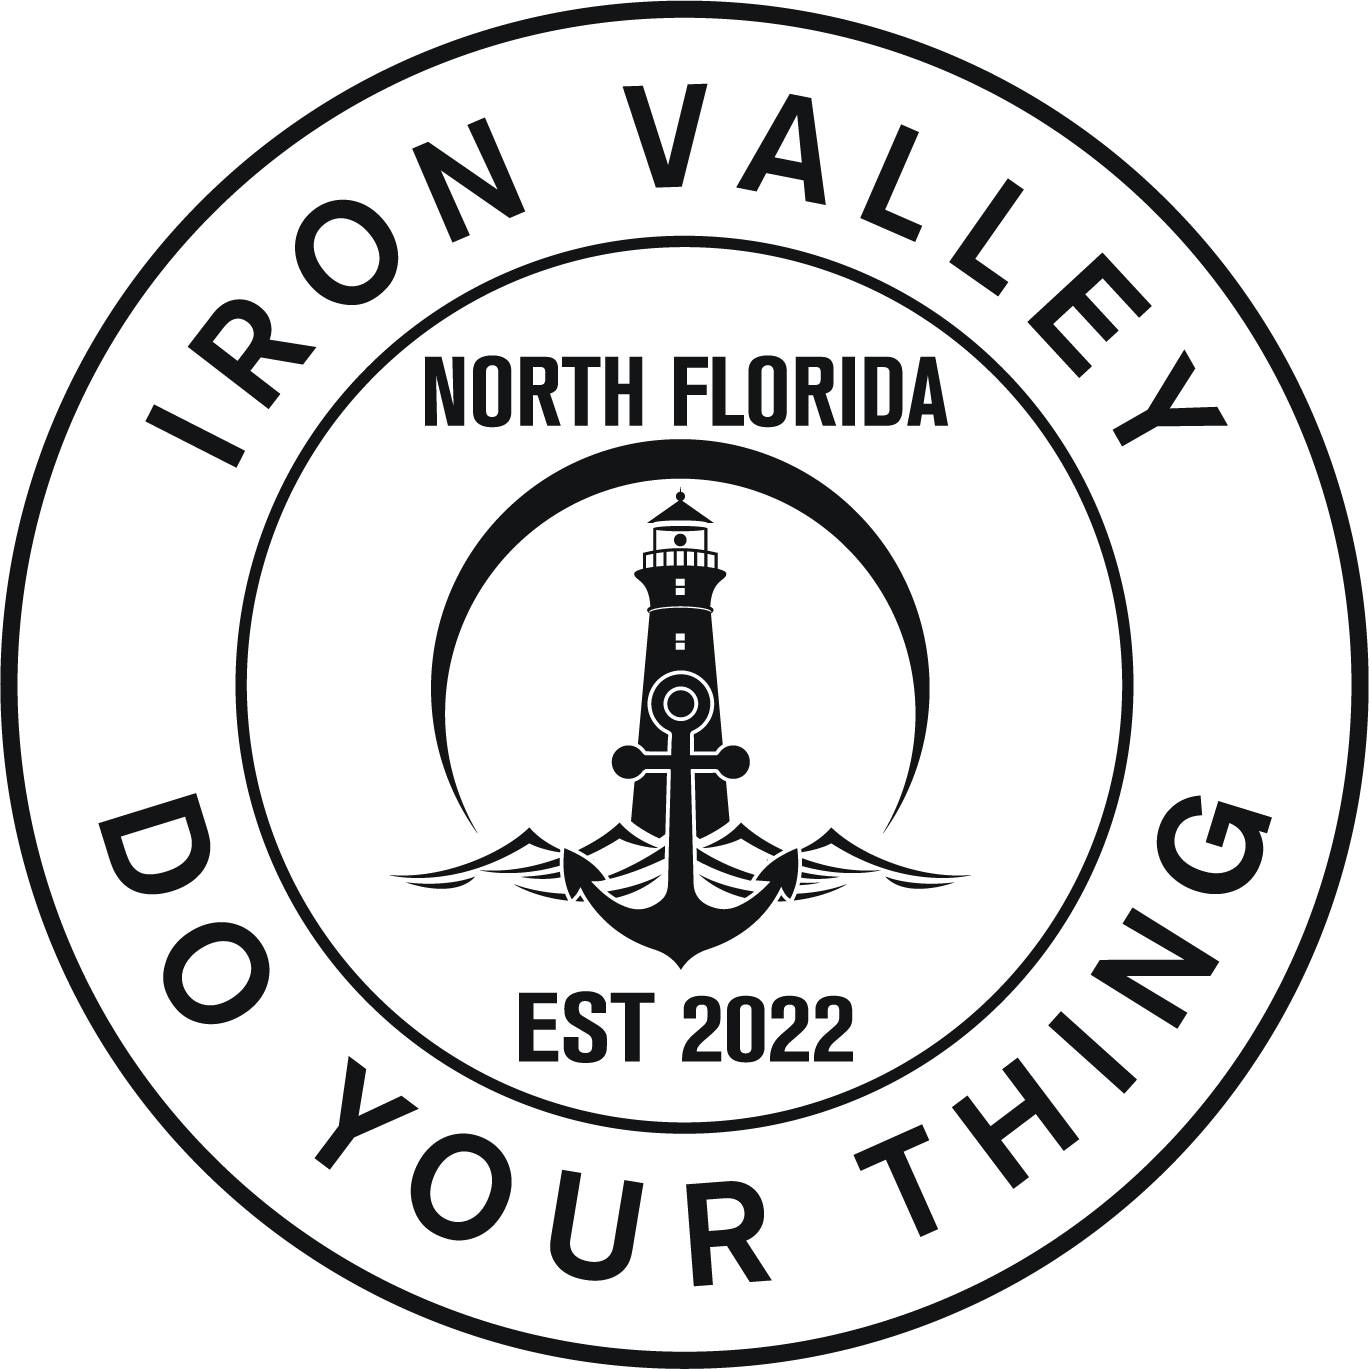 Iron valley north florida do your thing.